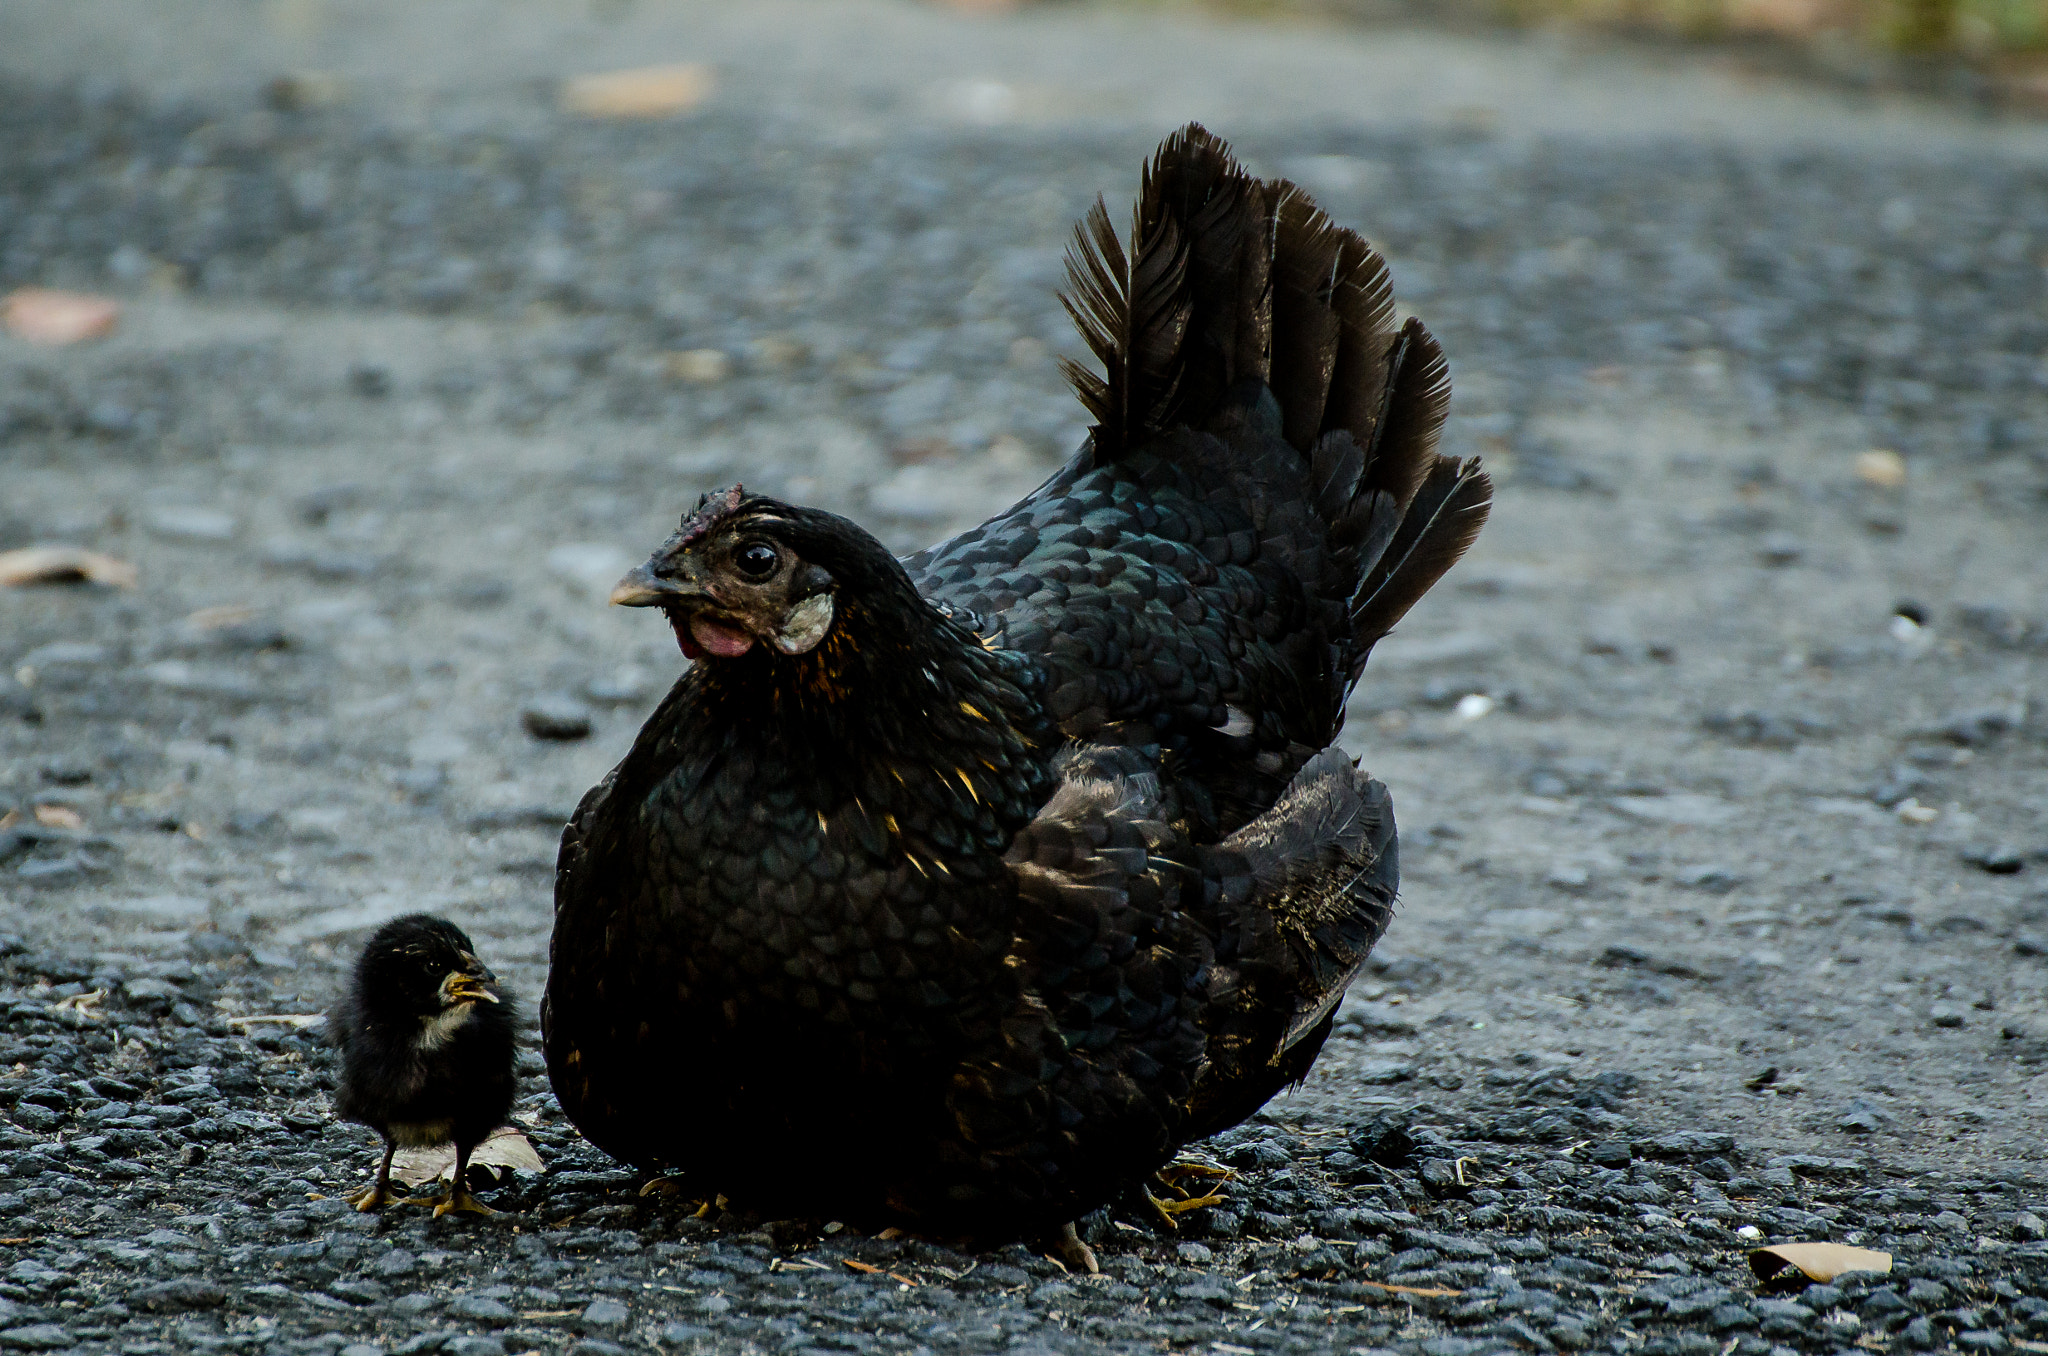 Download Mother Hen and chick(s) by Dwight Lugay / 500px